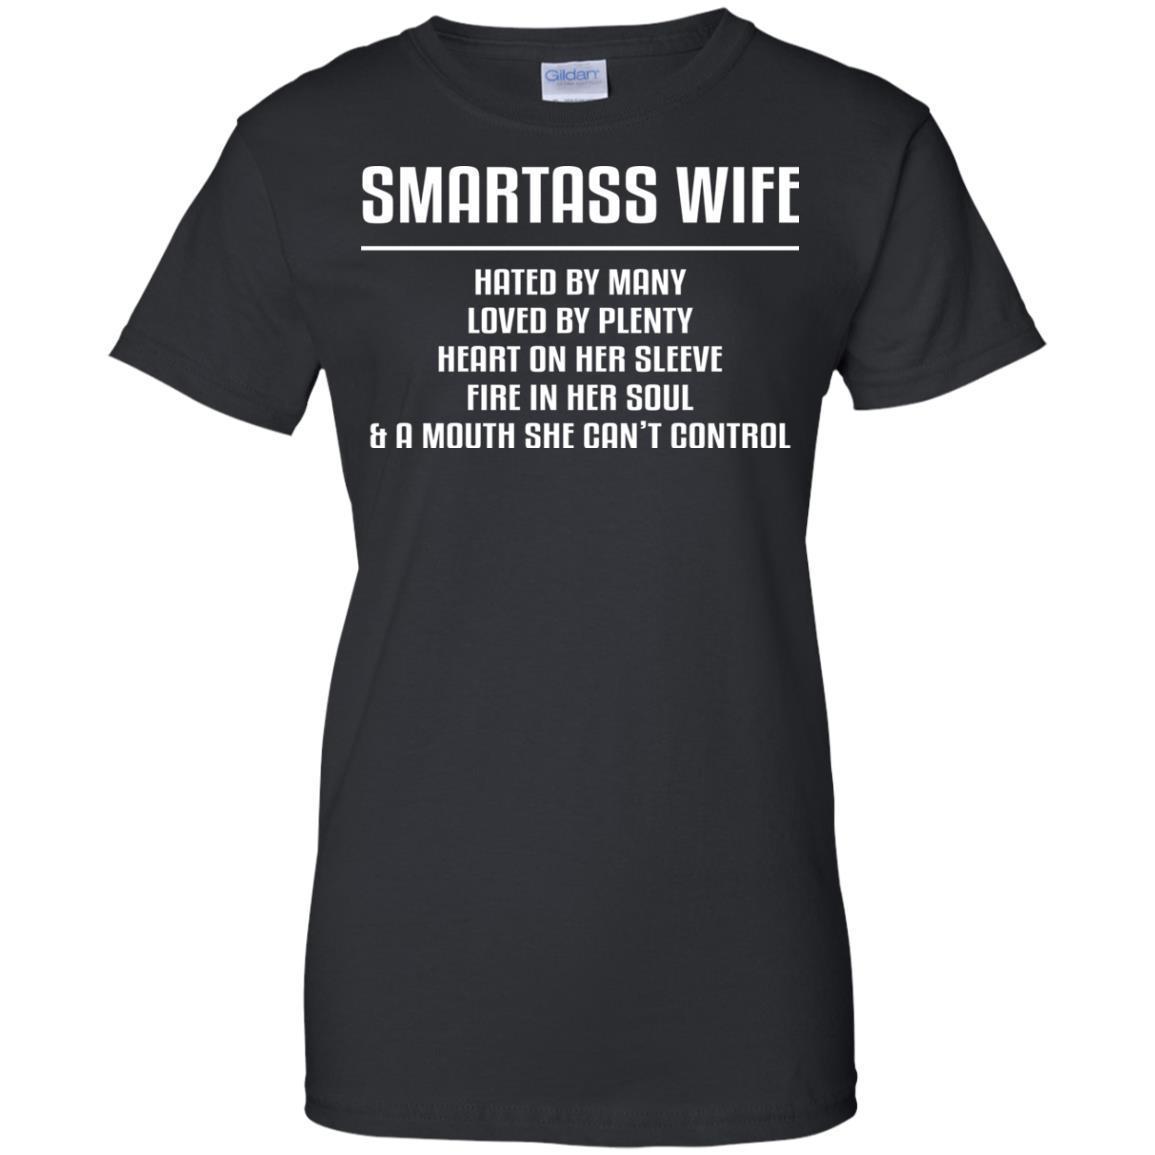 Check Out This Awesome Shirt Smartass Wife Hated By Many Loved By Plen